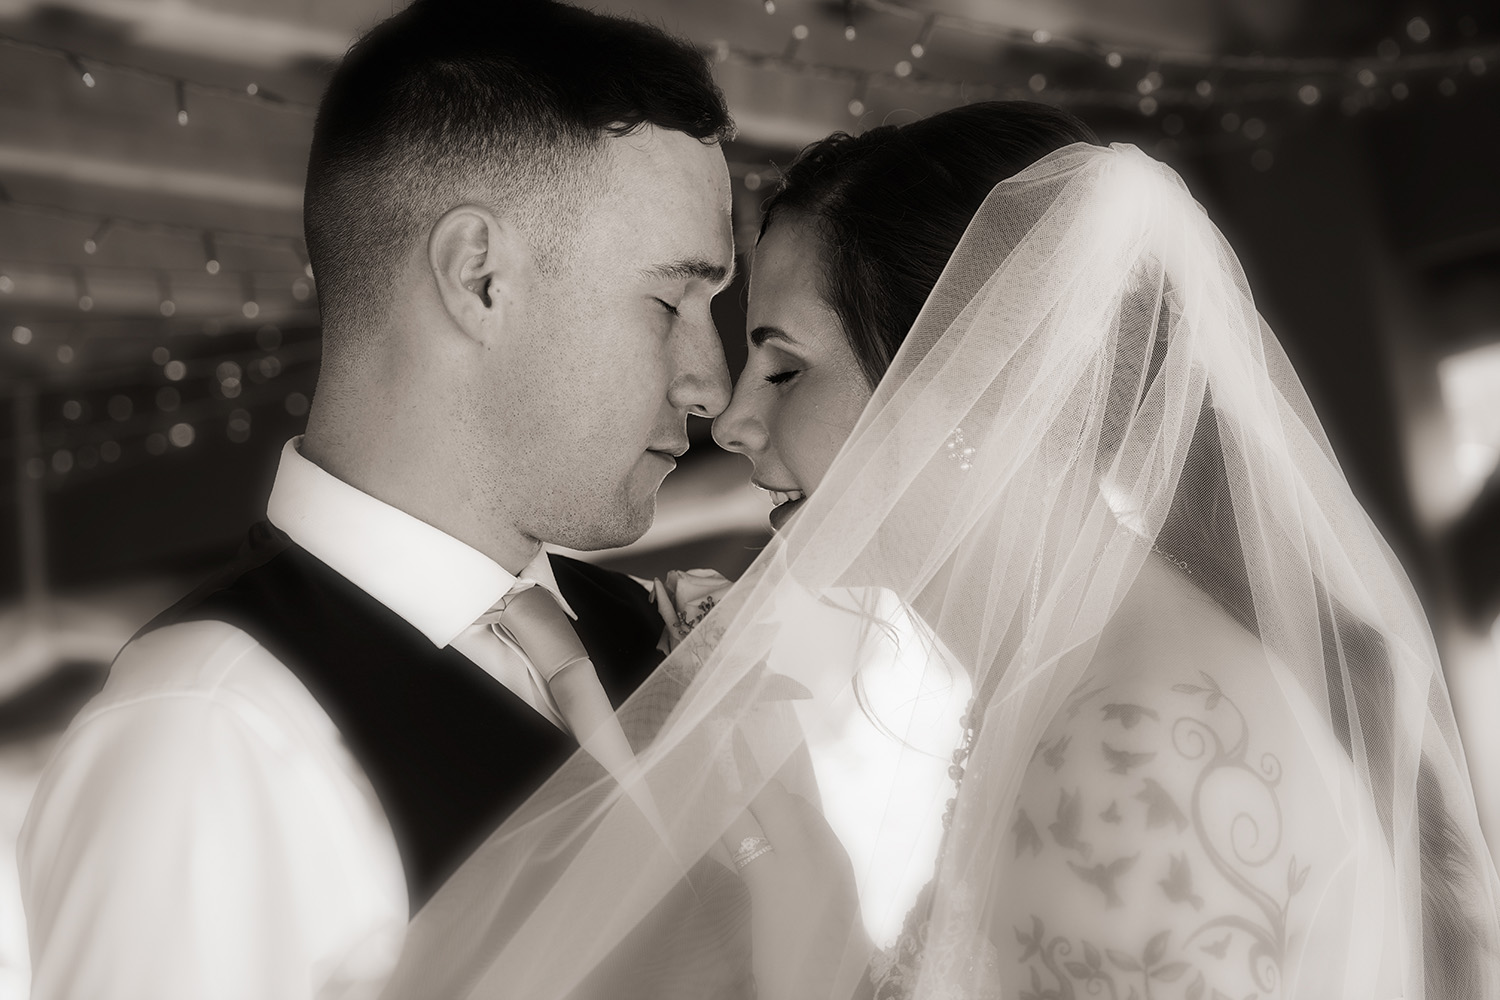 black and white portrait of a wedding couple with their foreheads touching and soft looks on their faces